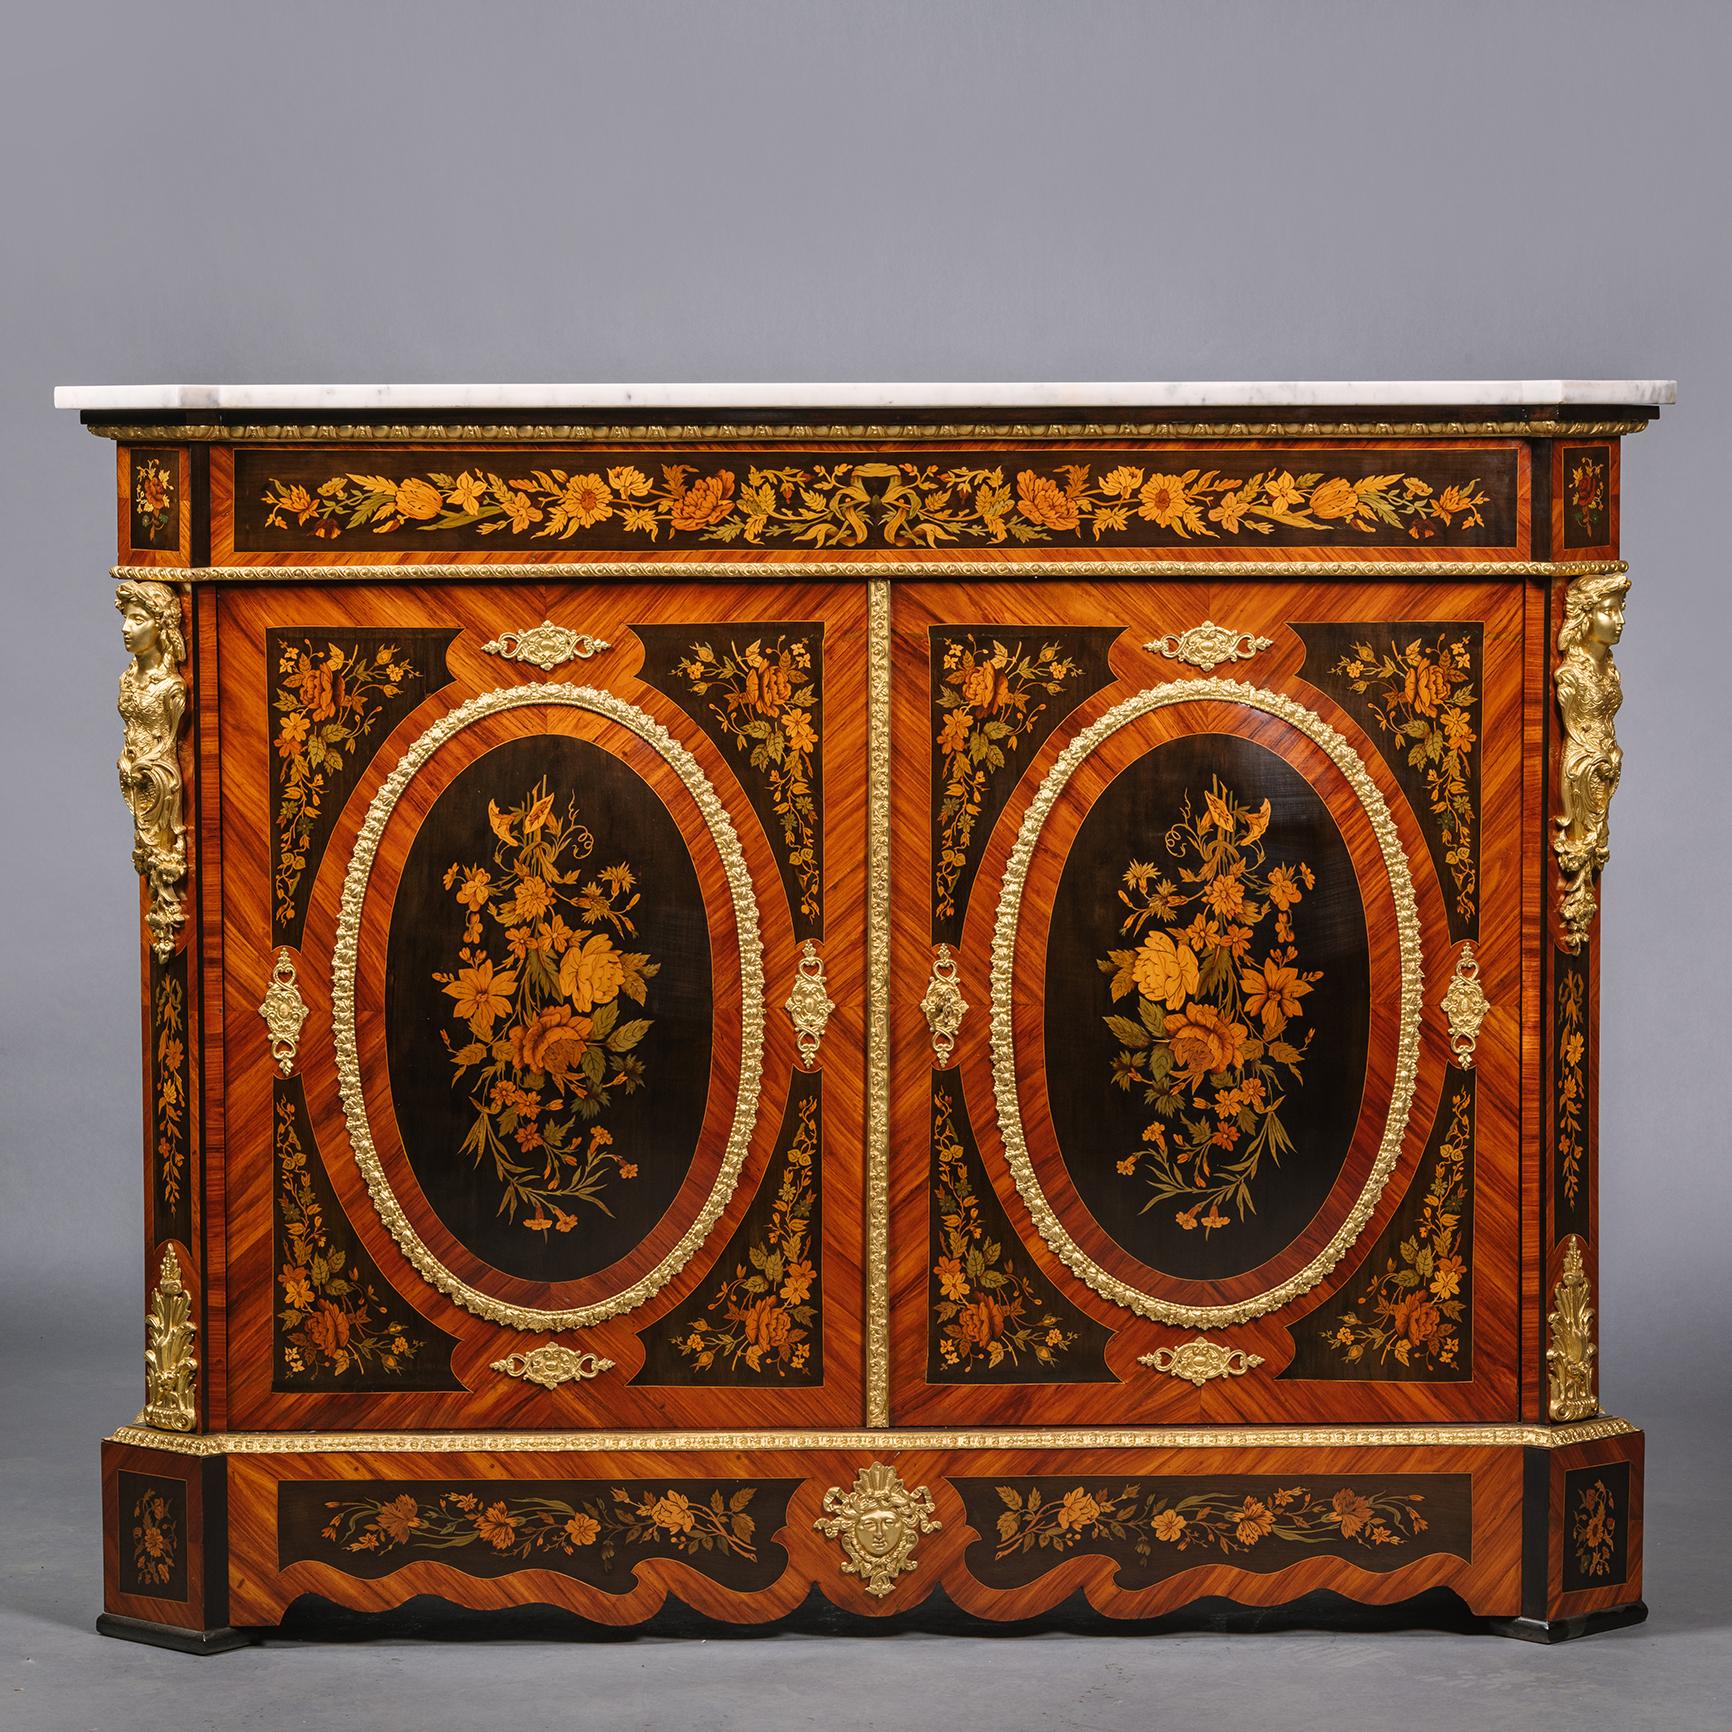 A Pair of Napoleon III Ormolu-Mounted Marquetry side cabinets.

Each cabinet having an eared rectangular marble top above a frieze and doors finely inlaid with elaborate foliate marquetry of floral sprays and bouquets, the cupboard doors opening